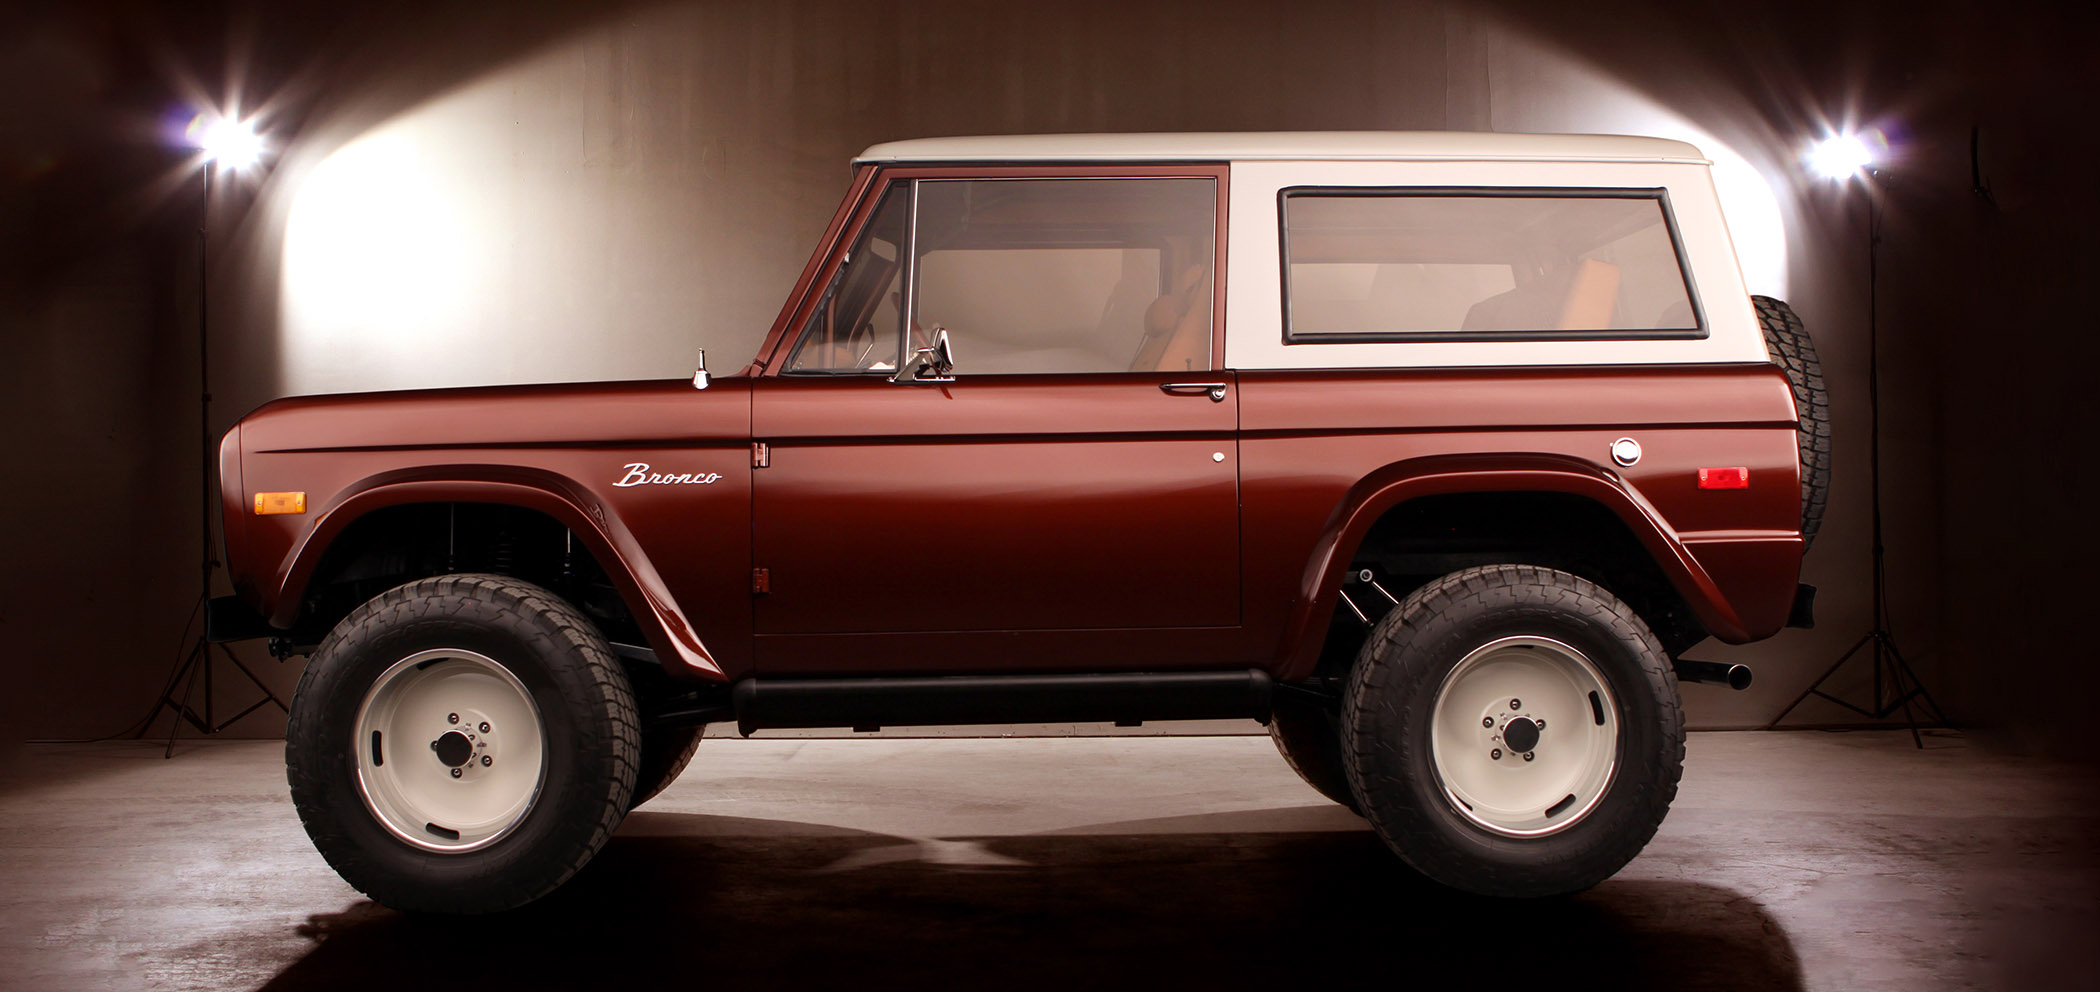 ’72 Ford Bronco